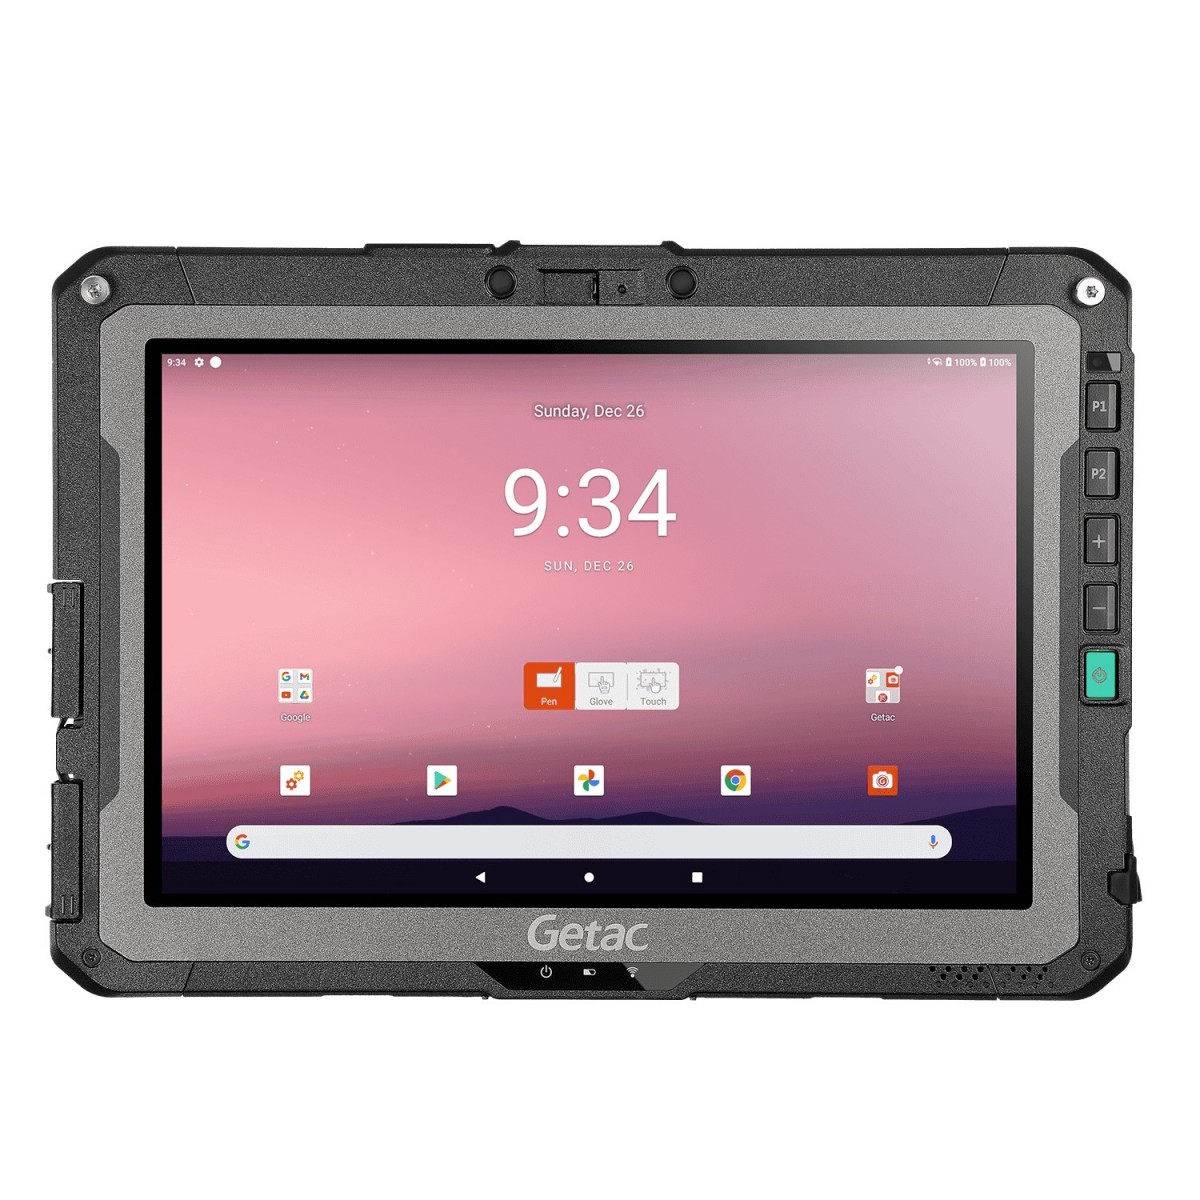 GETAC ZX10, USB, USB-C, BT (5.0), WLAN, NFC, GPS, RFID, Android, GMS - Tablet - 2.2 GHz